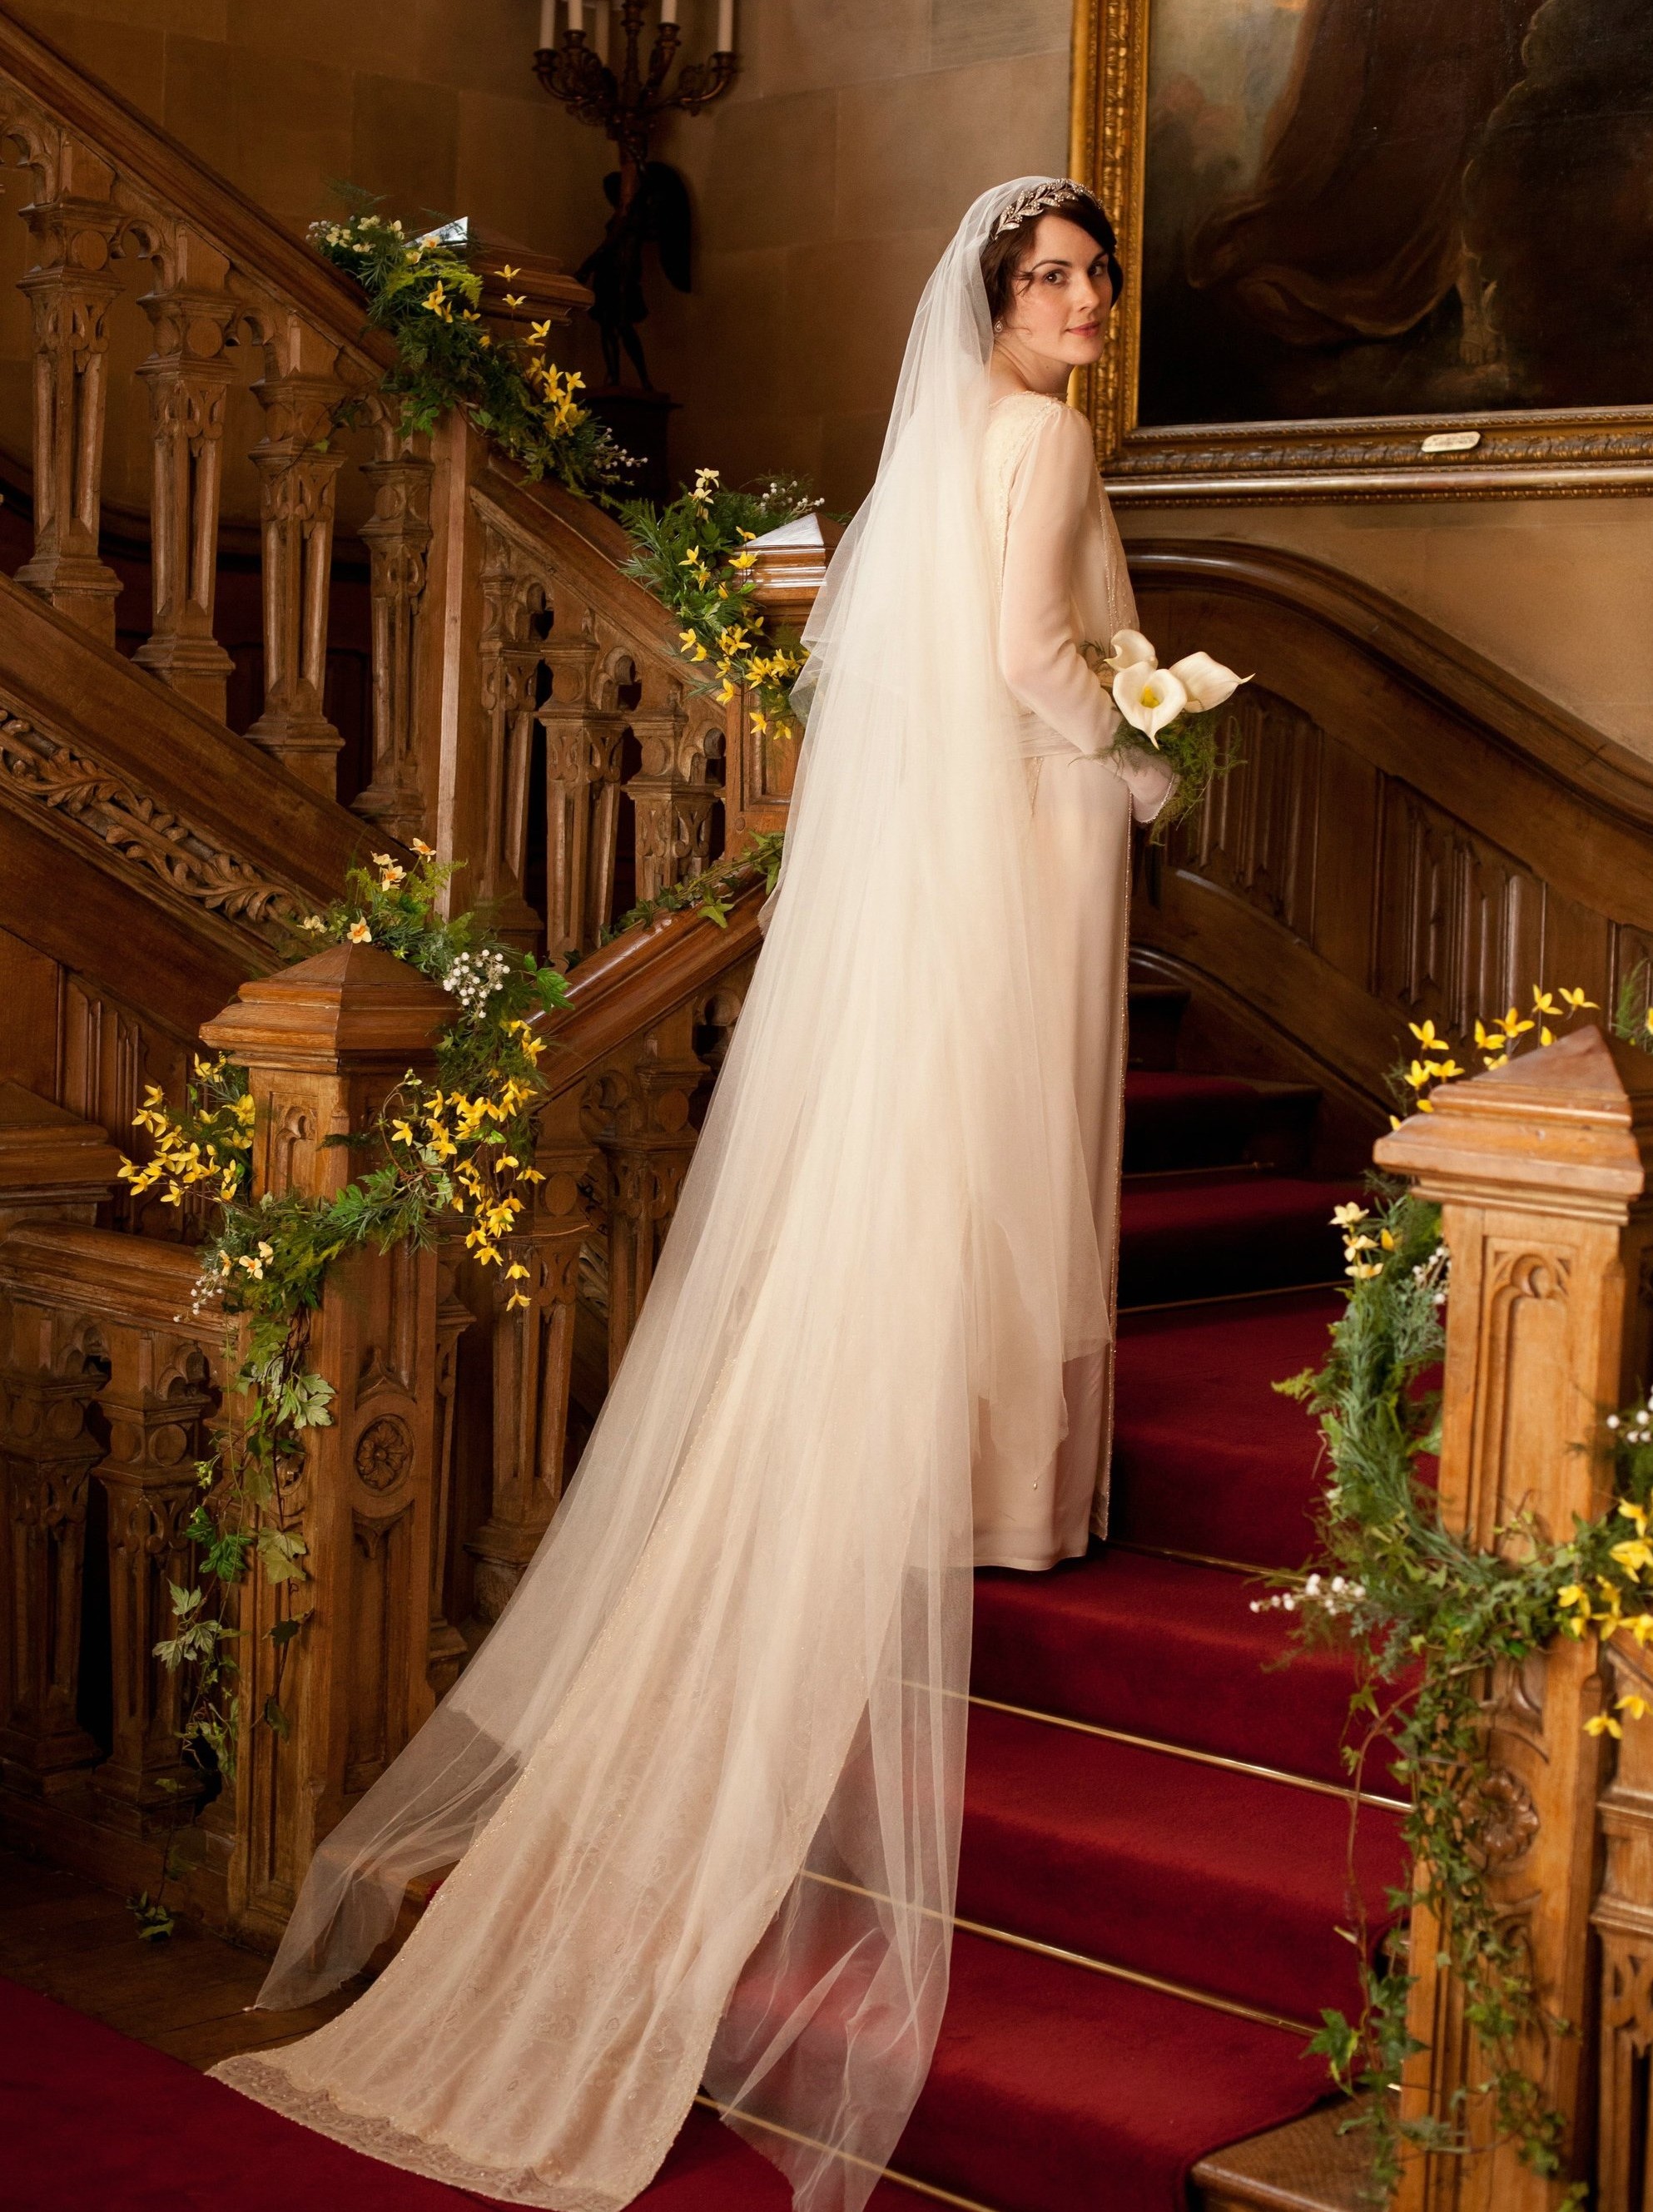 Downton Abbey Series 3 Wedding - Lady Mary's Train and Veil